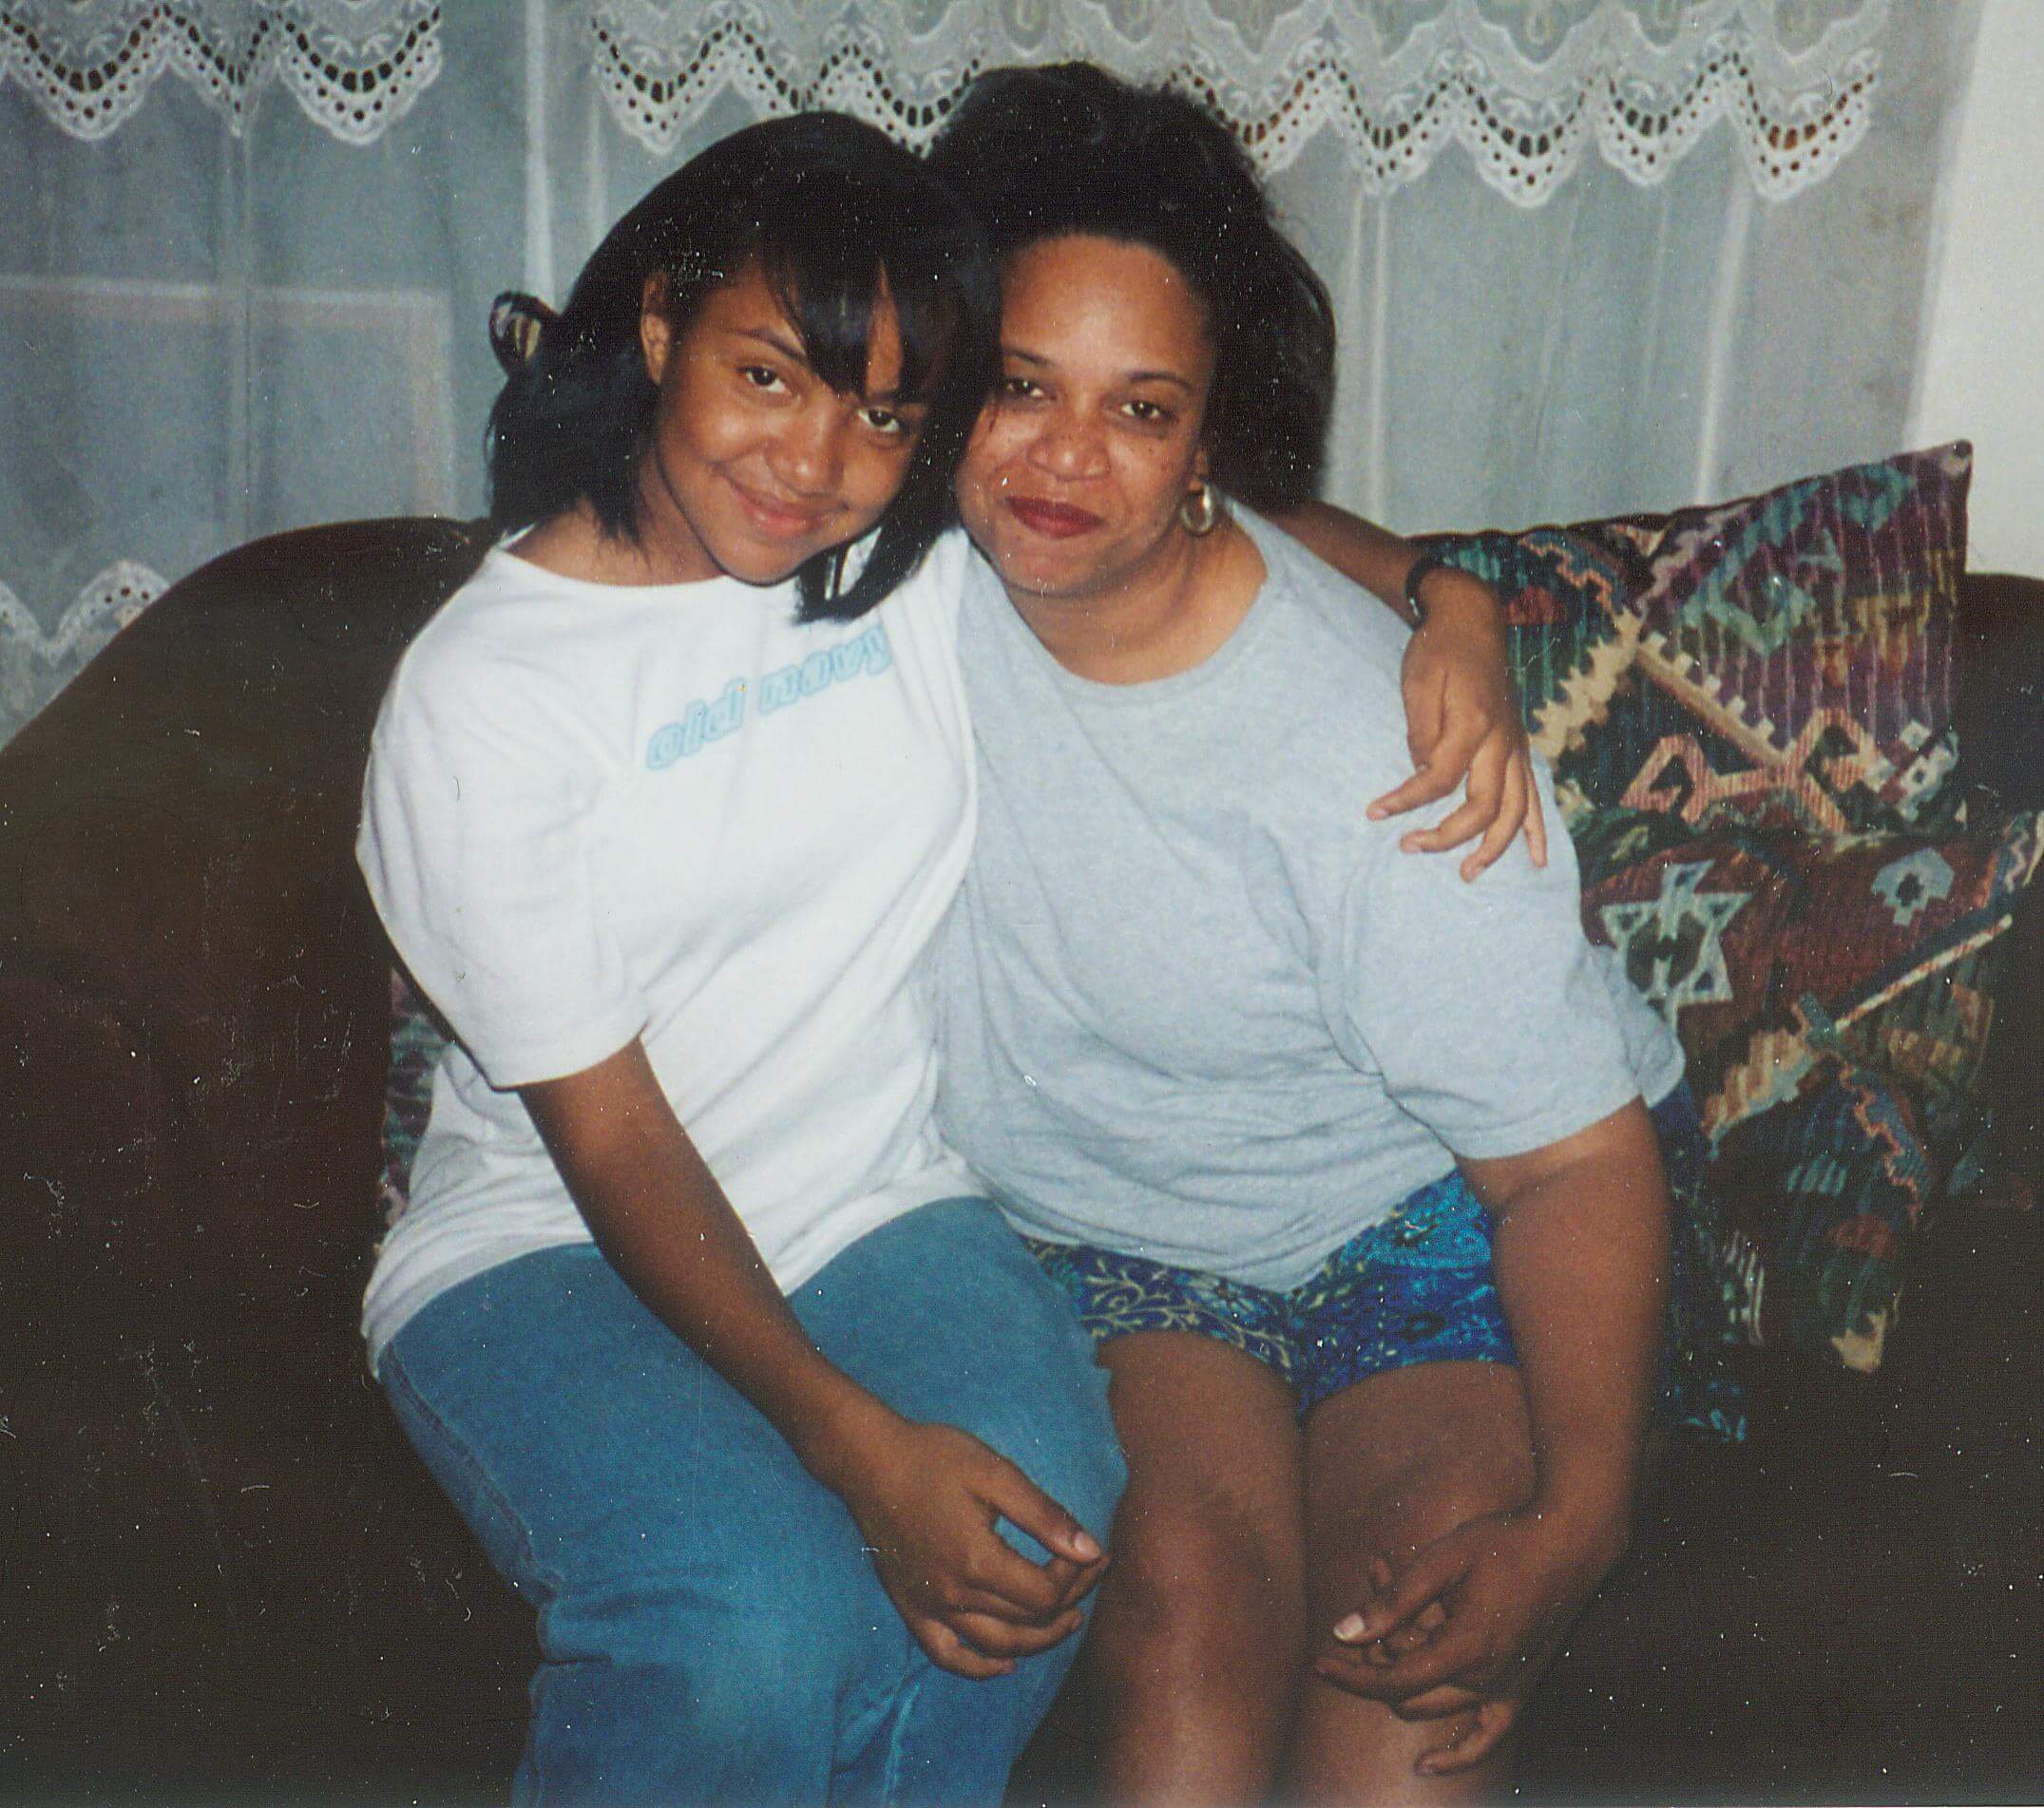 A teenager and a woman sitting on a sofa hug each other while posing in front of the camera.